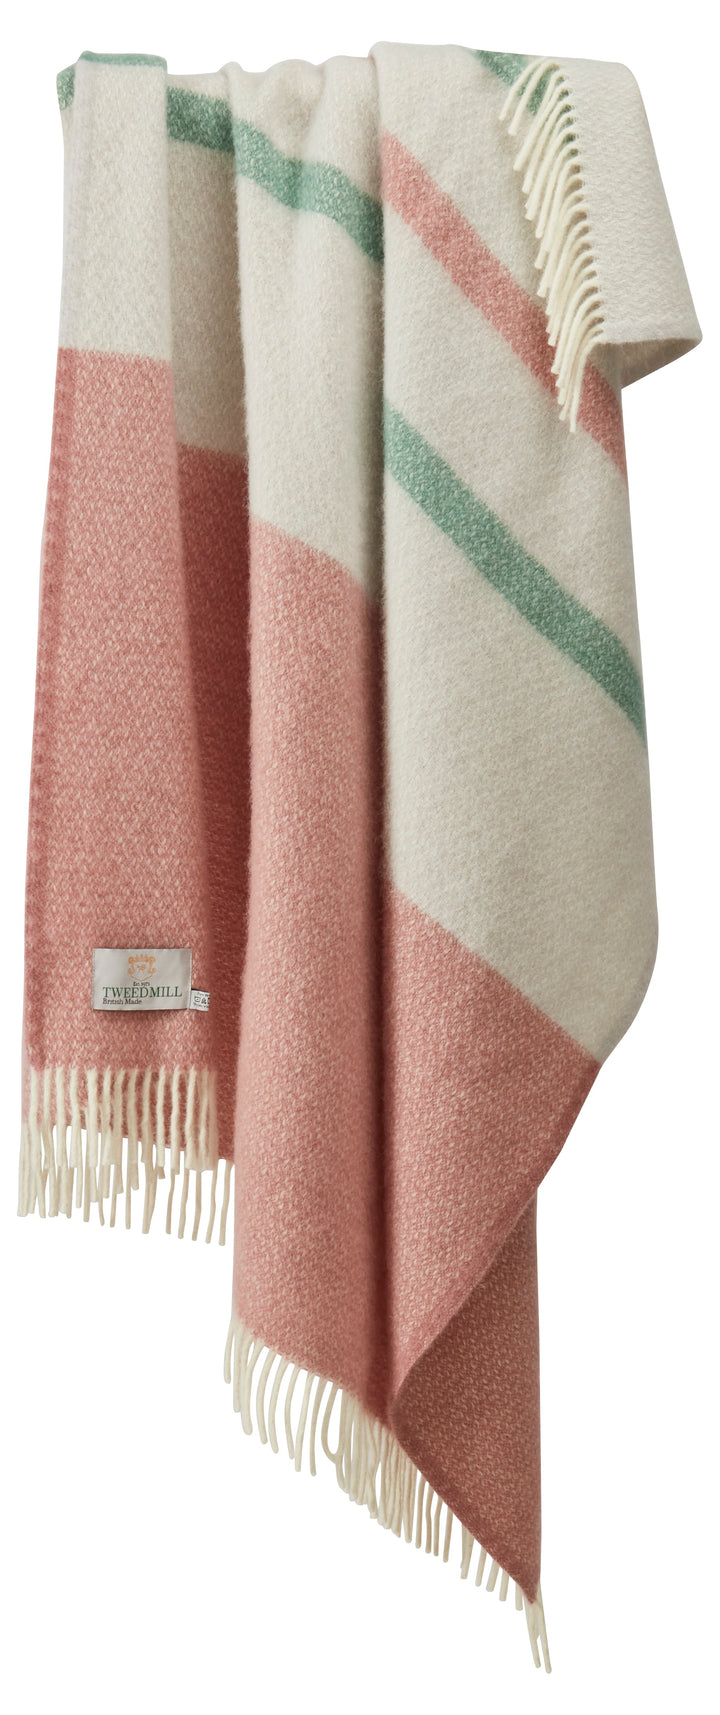 Tweedmill Dusky Pink and Sea Green Brecon Stripe Throw for sale at Source for the Goose, Devon, UK